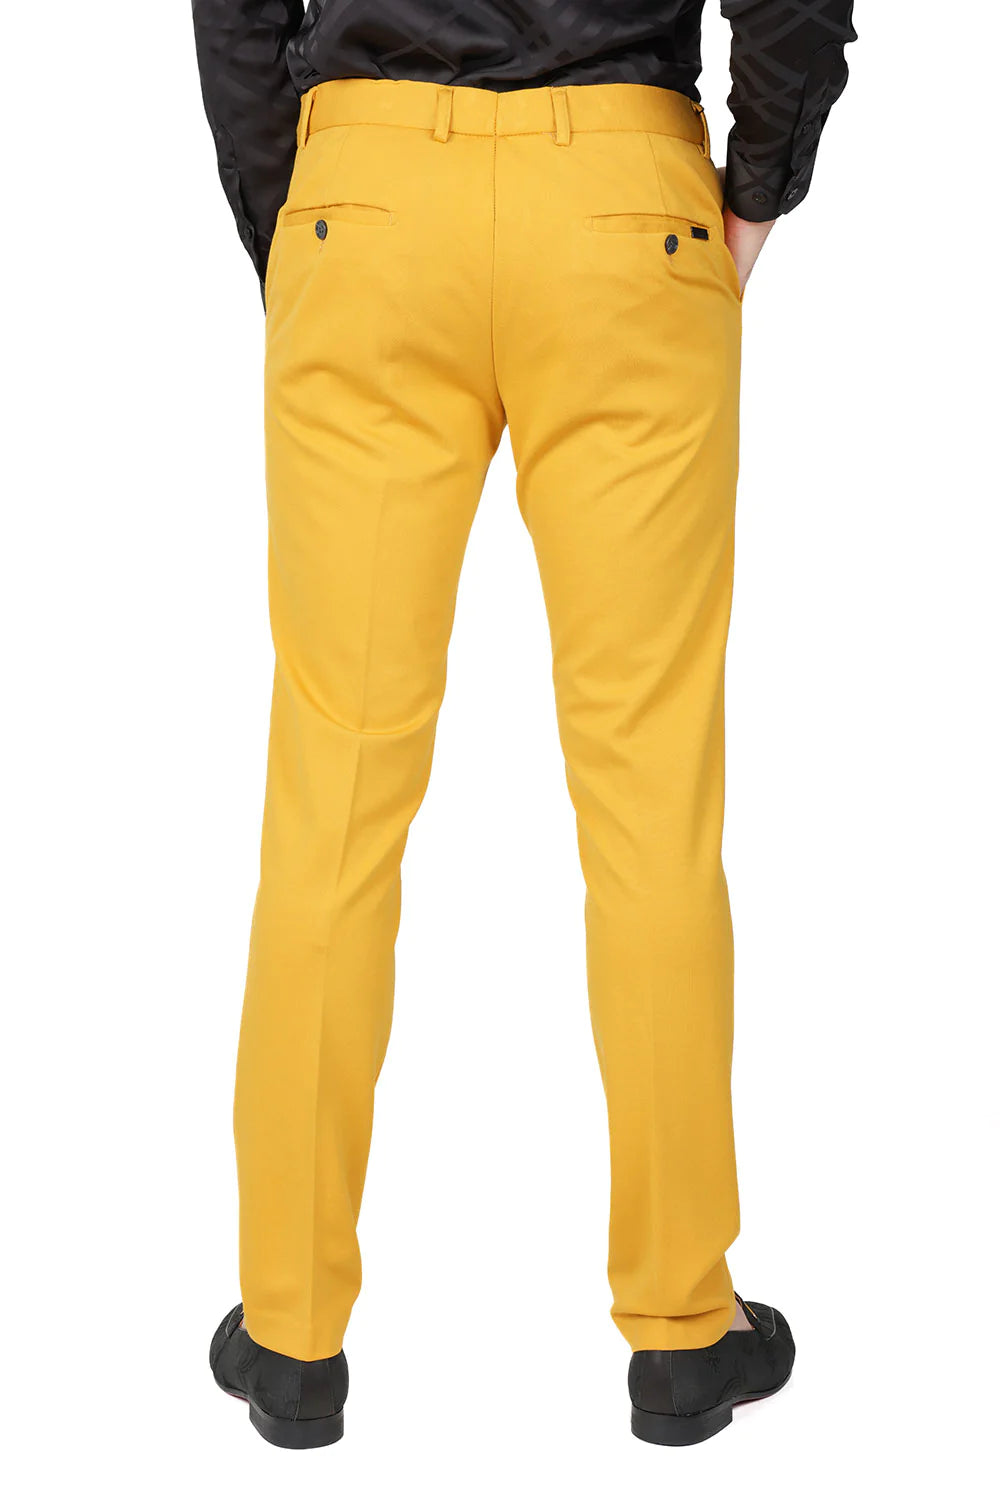 Men's Solid Color Basic Essential Chino Dress Pants